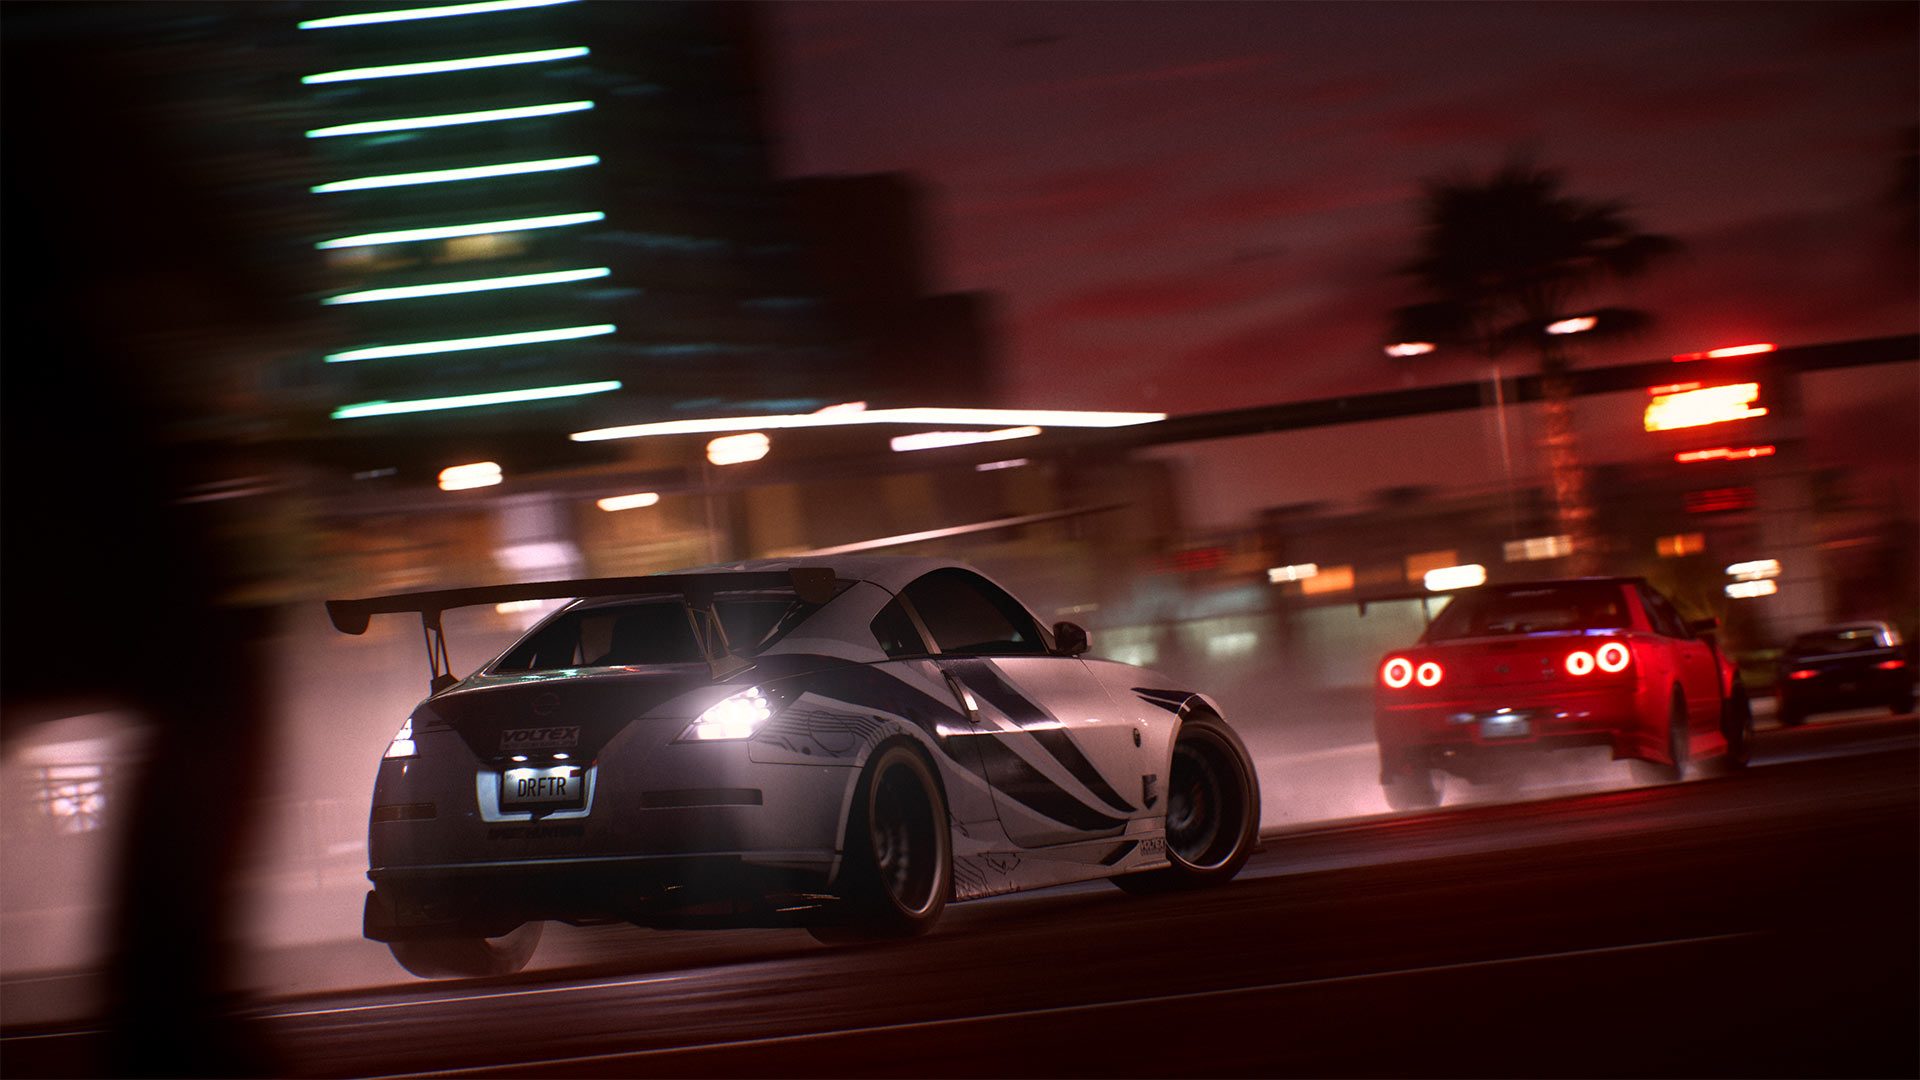 New Need for Speed and Plants vs. Zombies games launch in 2019